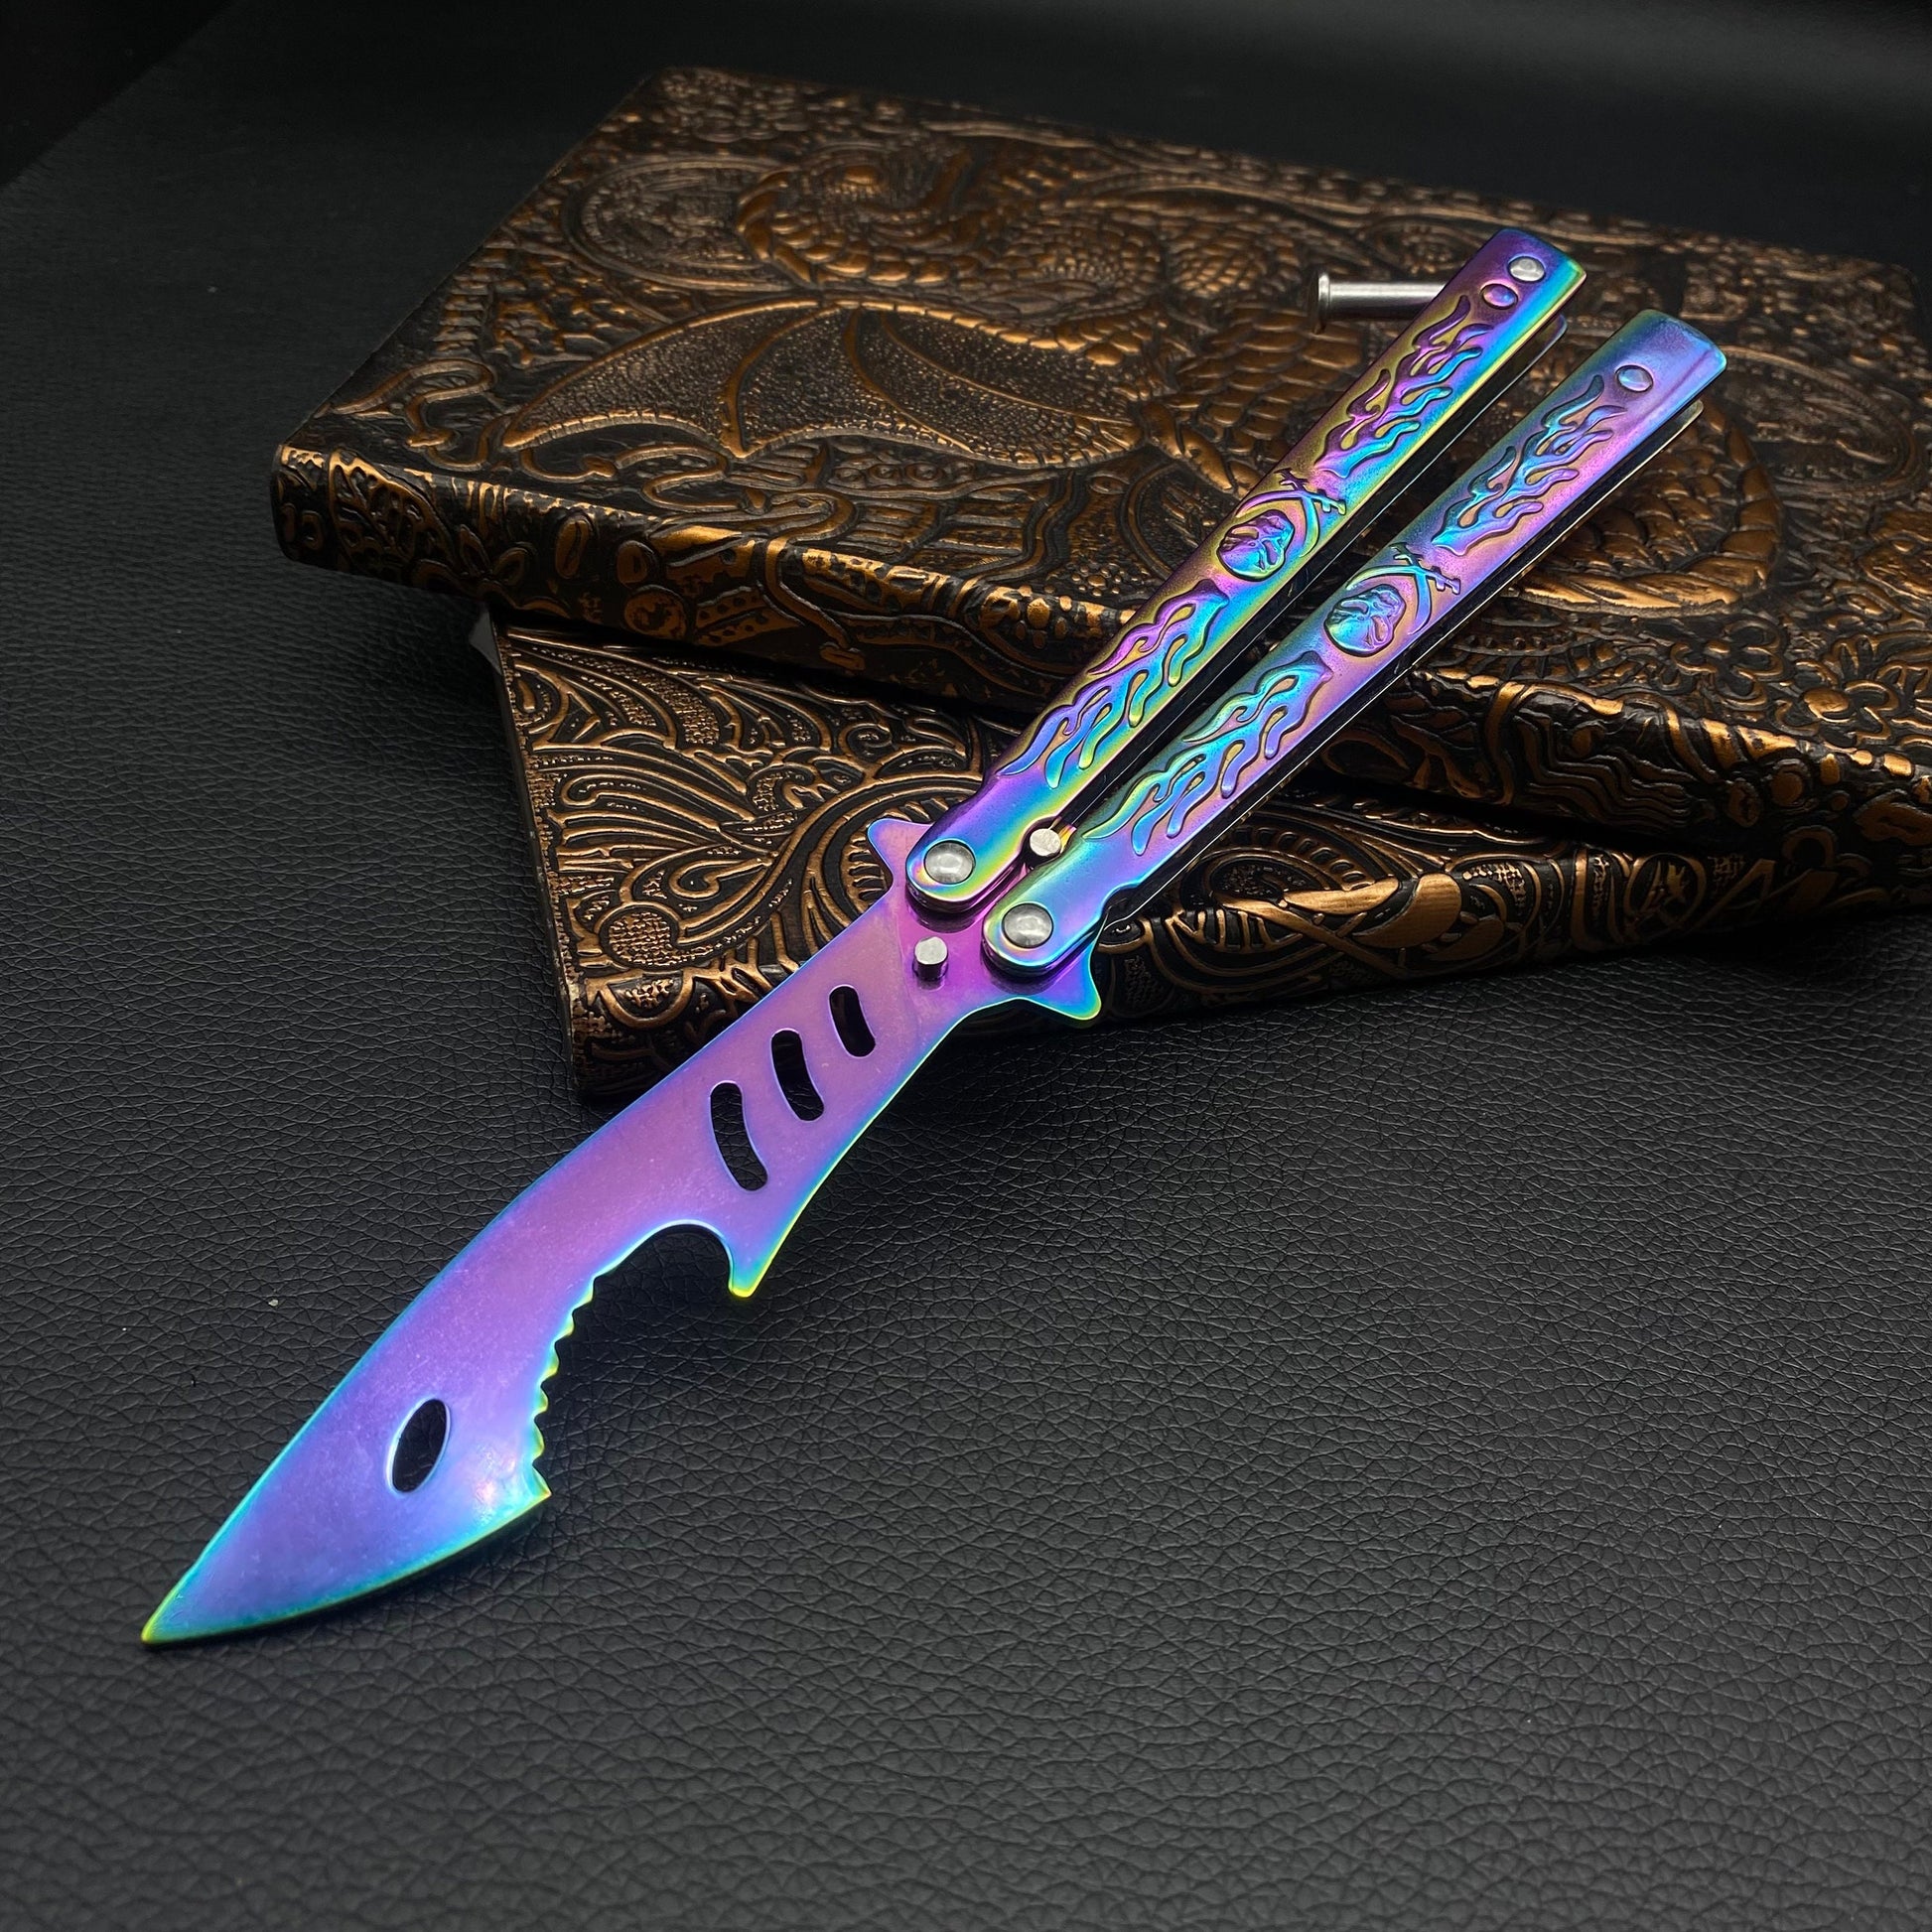 Stainless Steel Skull 3D Sculpture Balisong Butterfly Knife